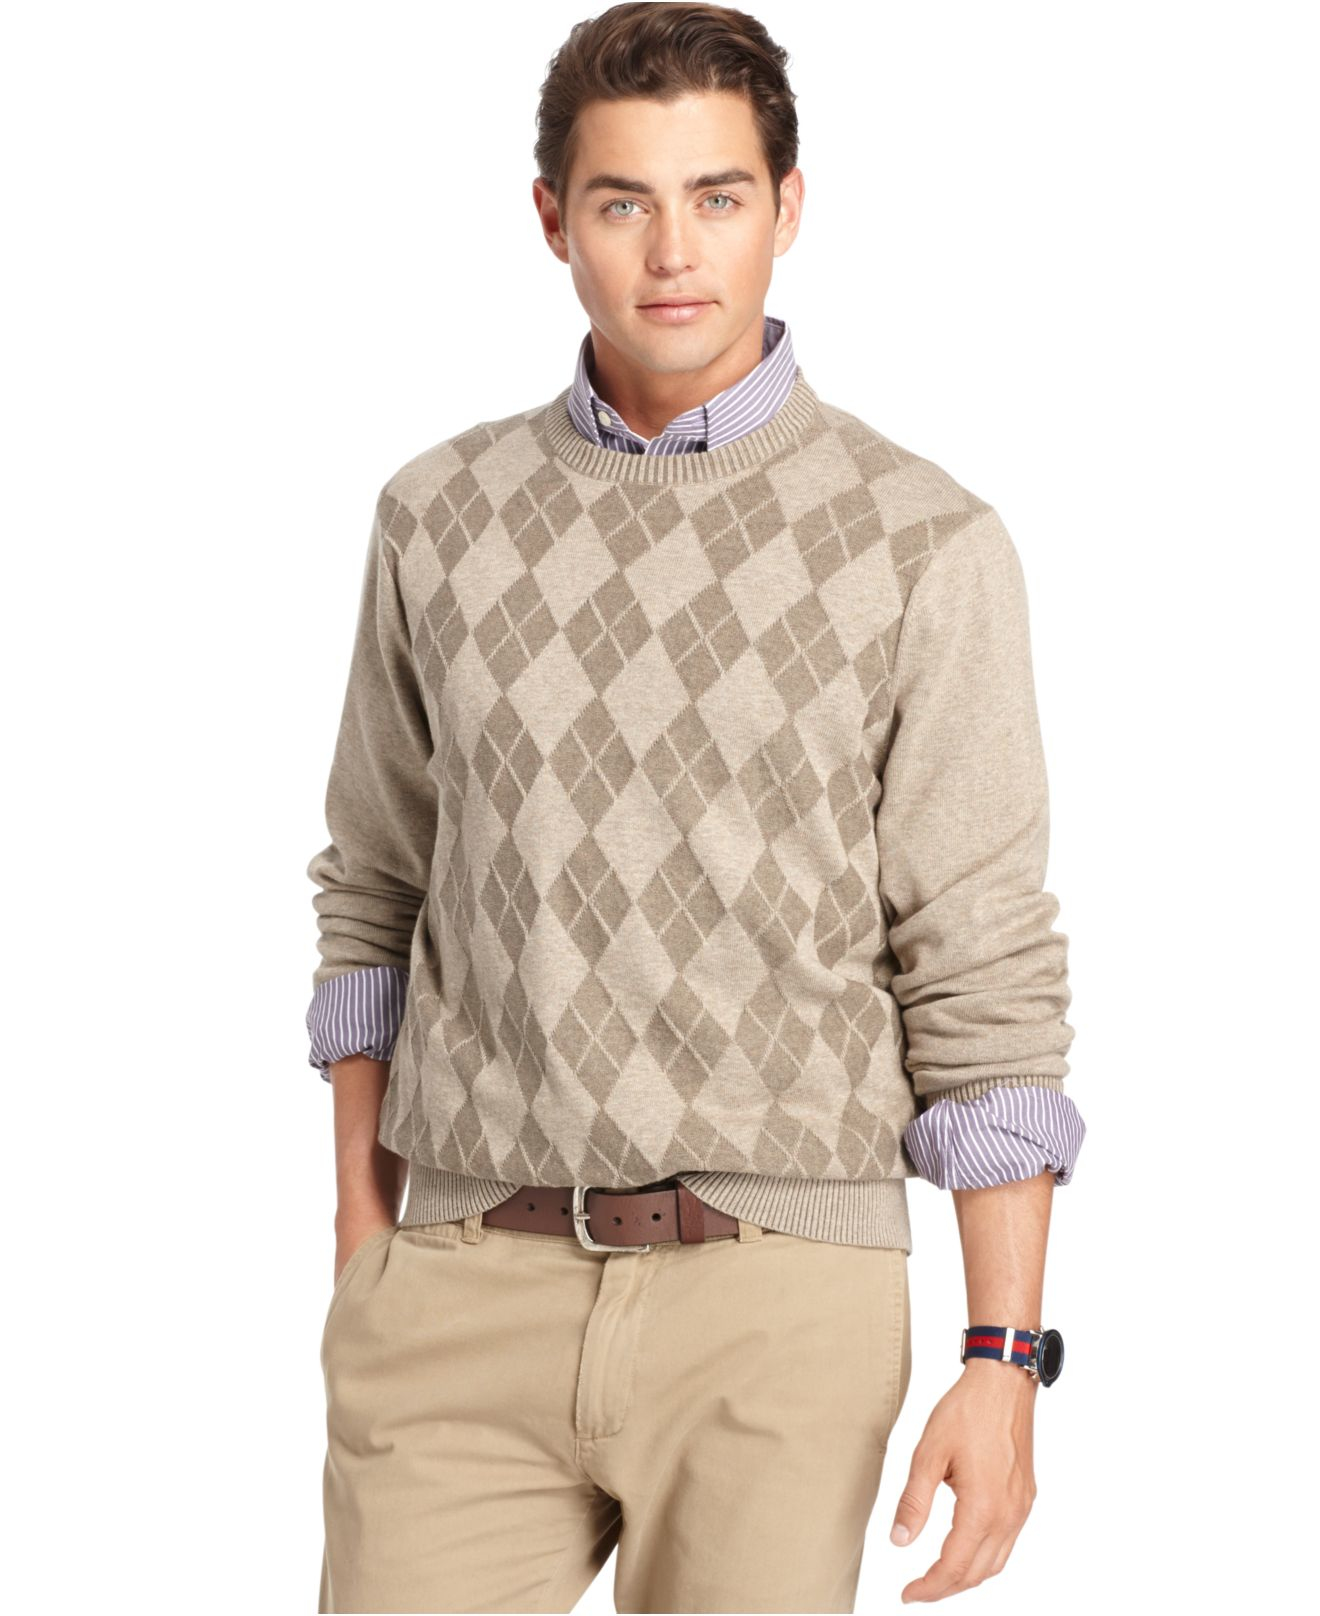 Izod Big And Tall Textured Argyle Sweater in Natural for Men - Lyst